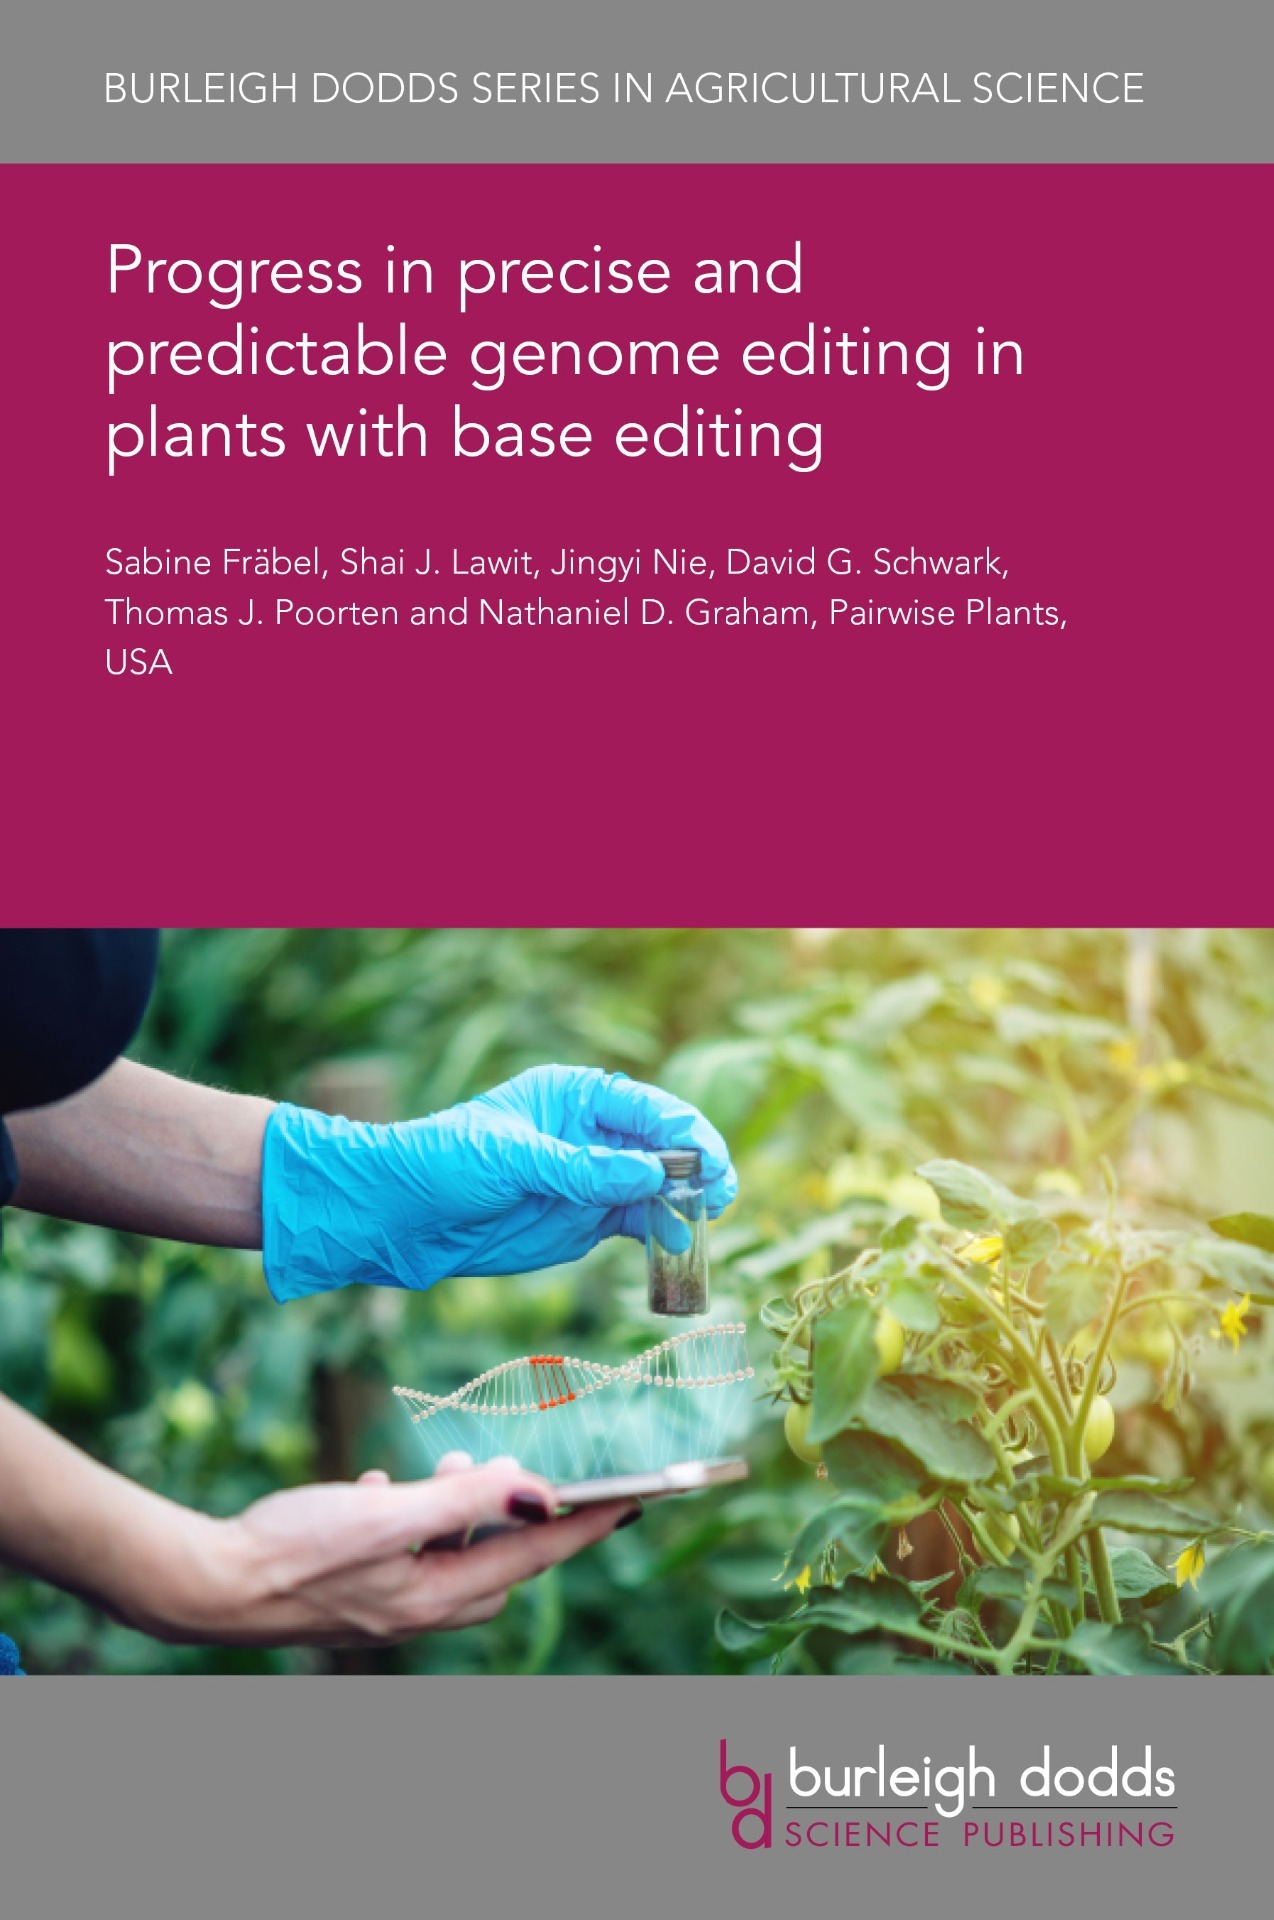 -	Progress in precise and predictable genome editing in plants with base editing